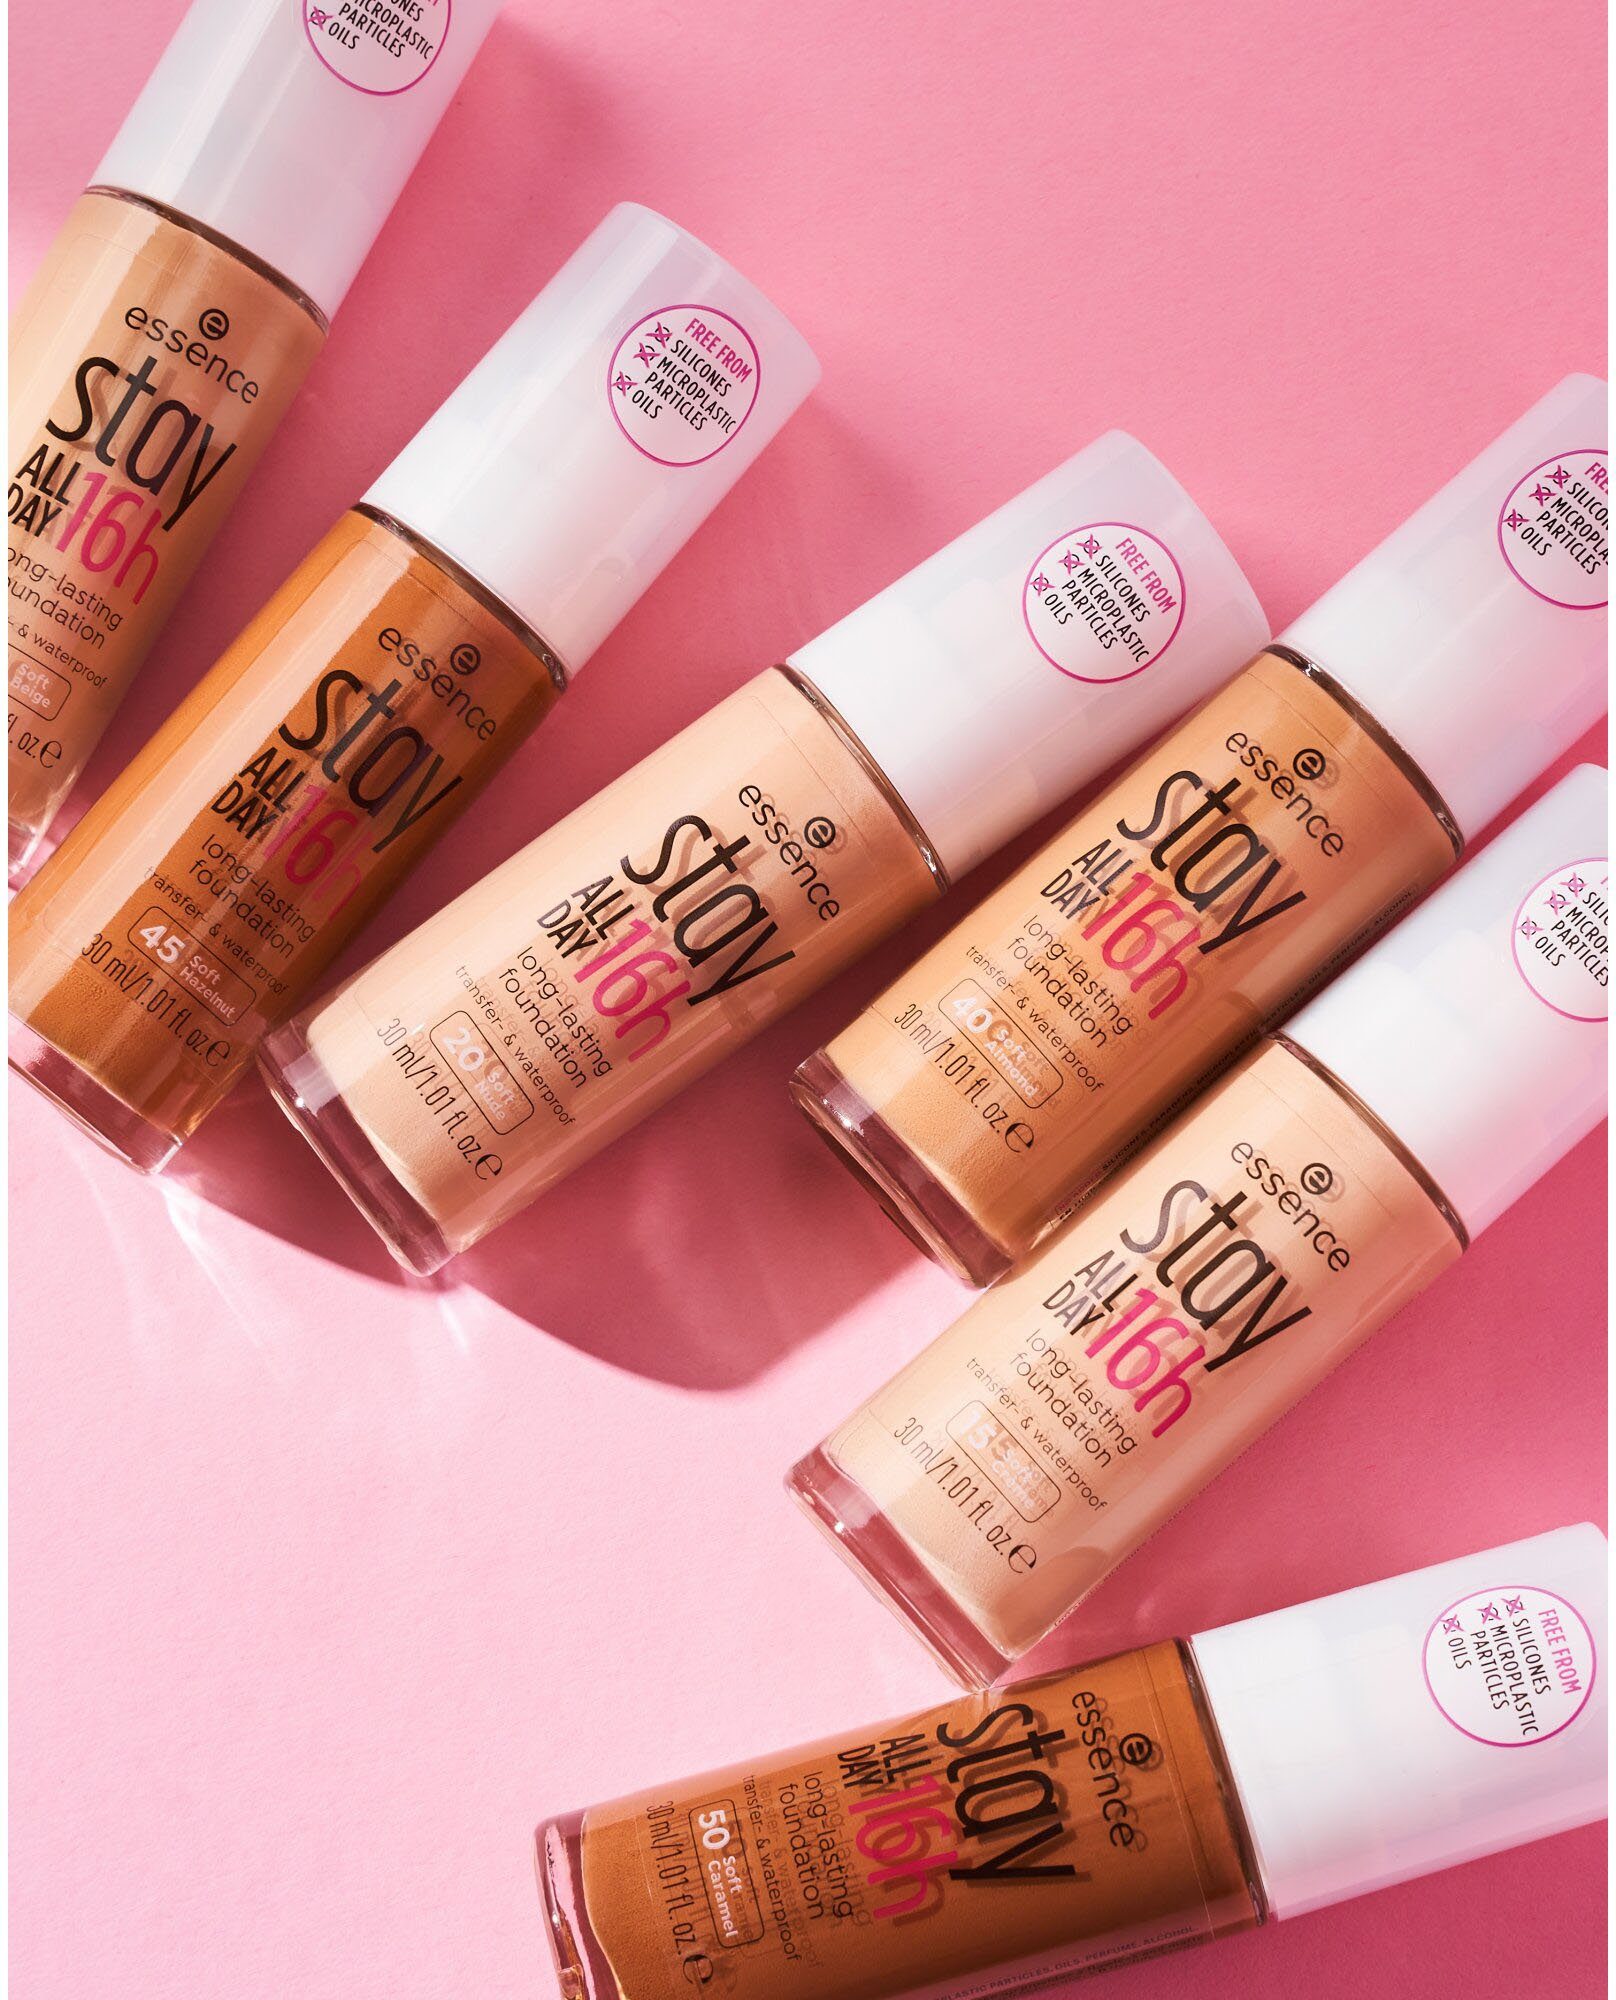 Soft Foundation Essence 16h Creme 3-tlg. ALL long-lasting, DAY stay